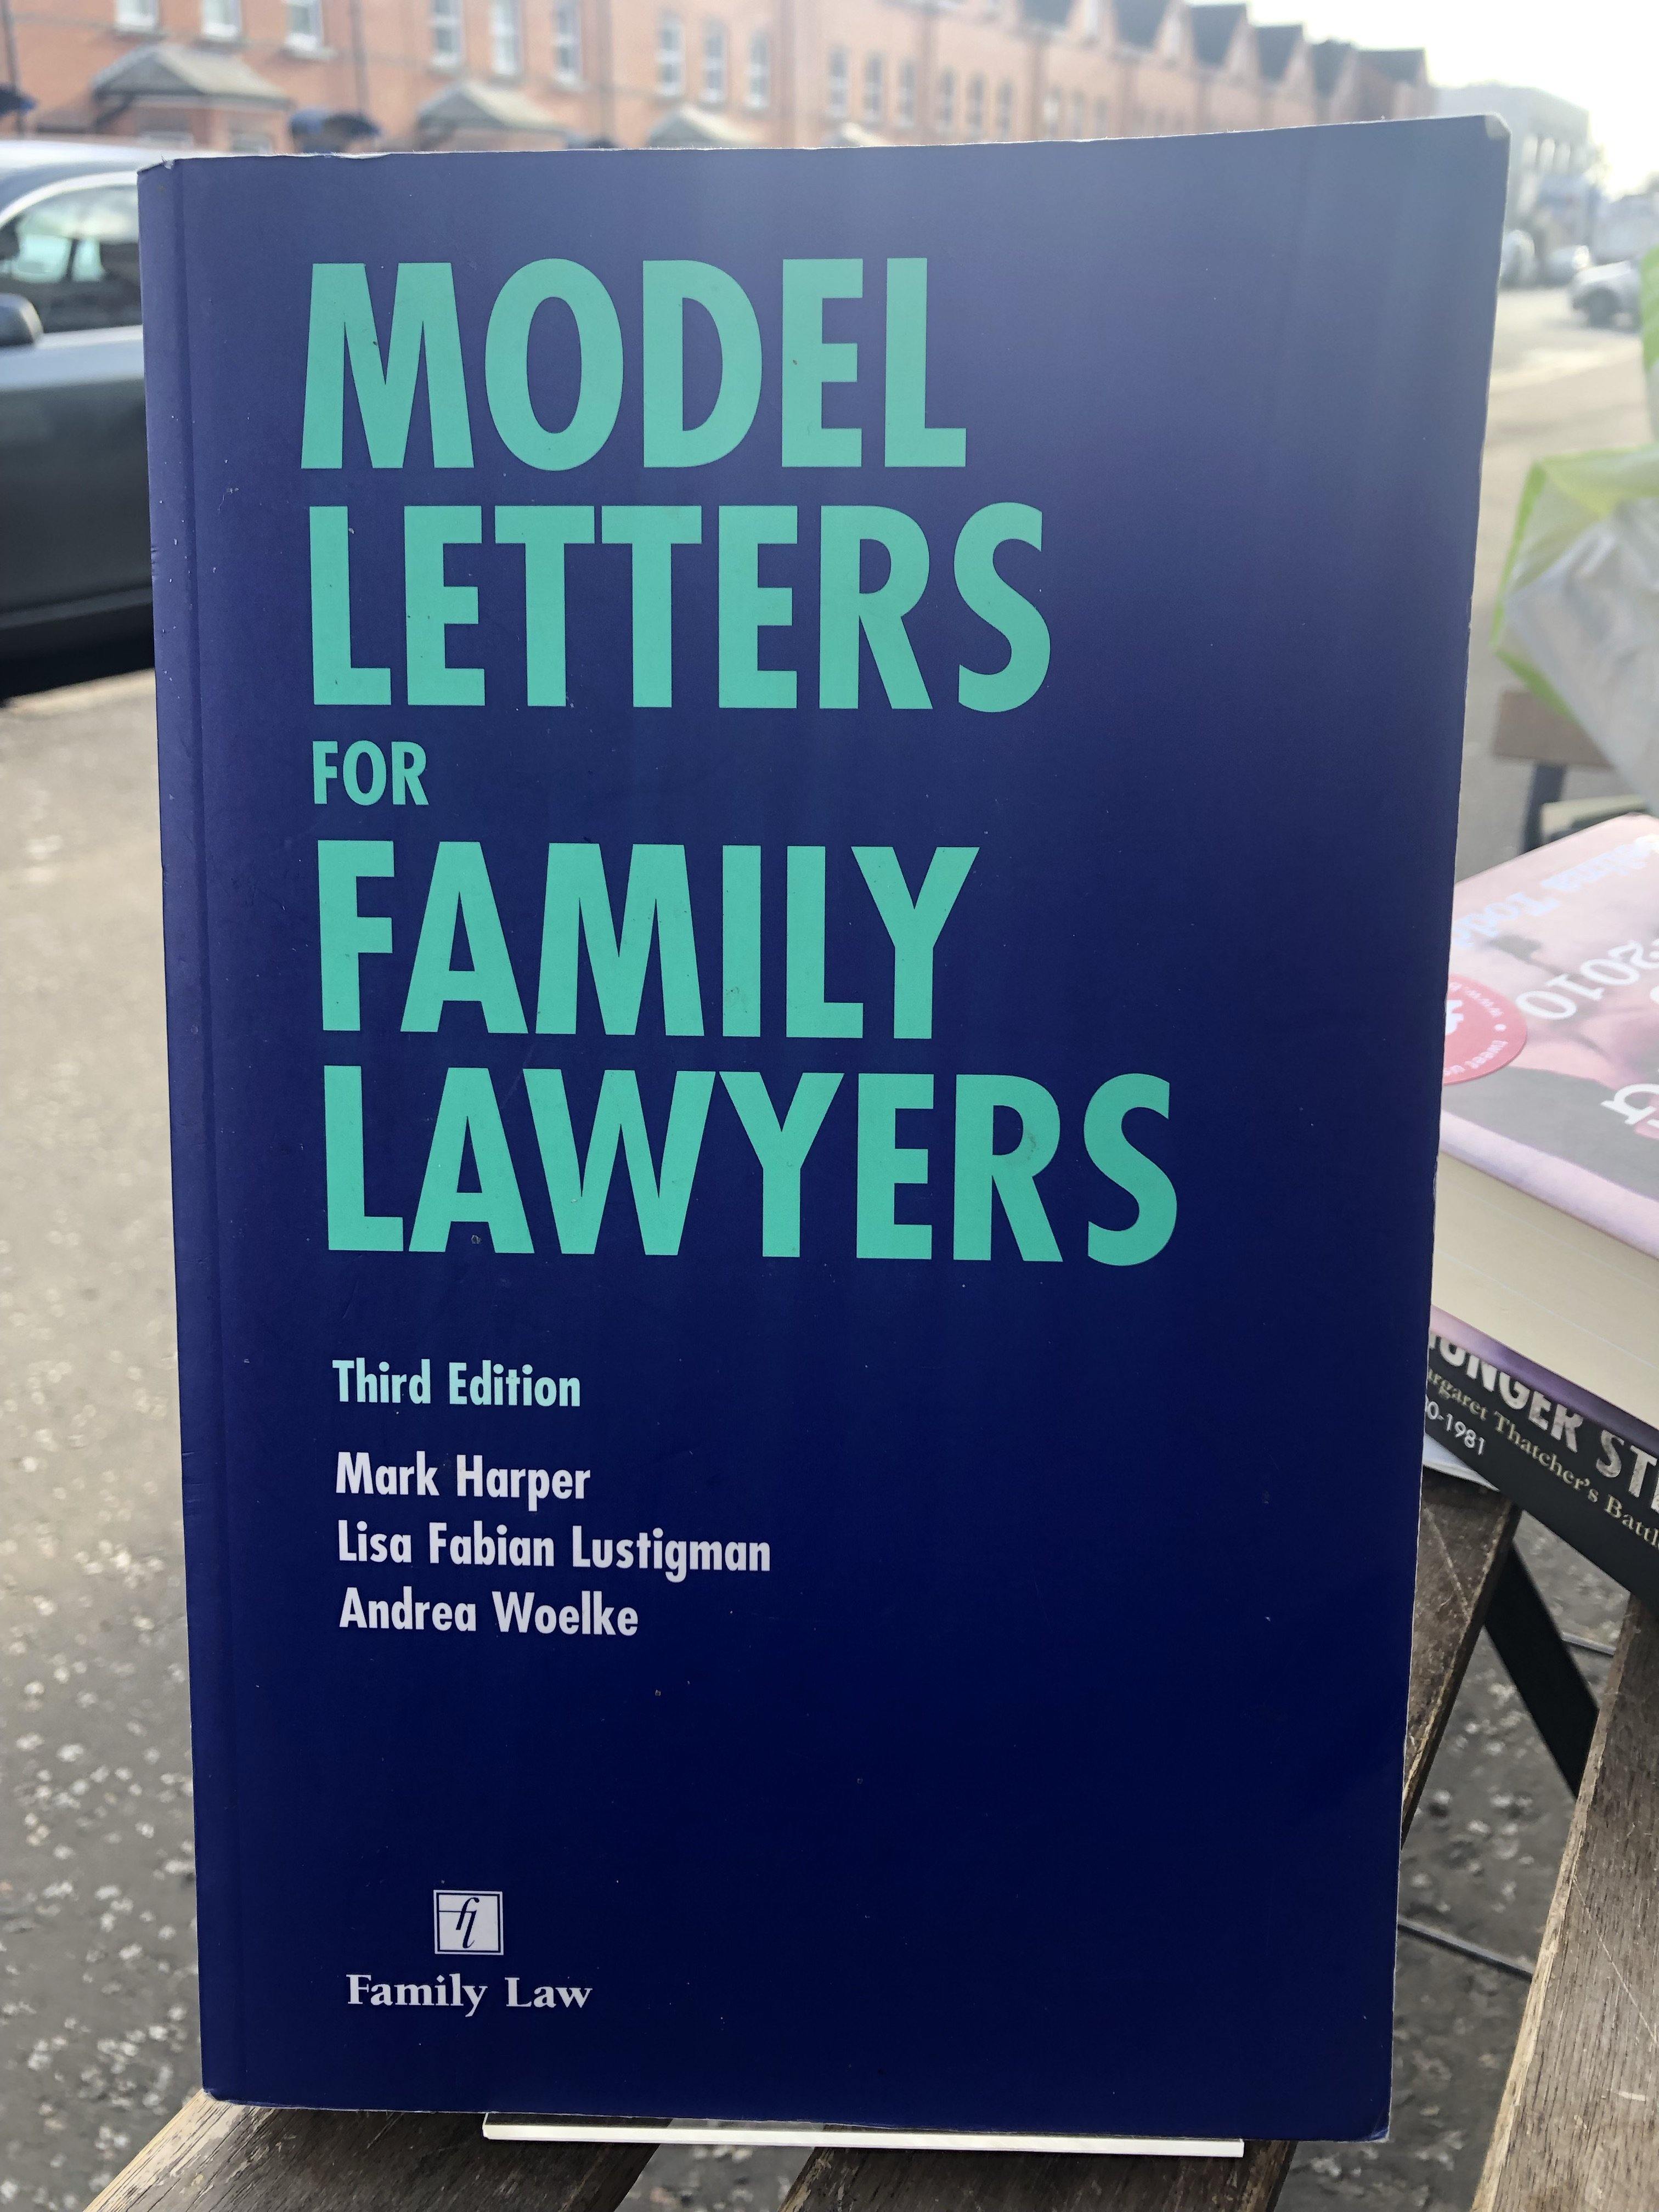 Model Letters for Family Lawyers - Belfast Books